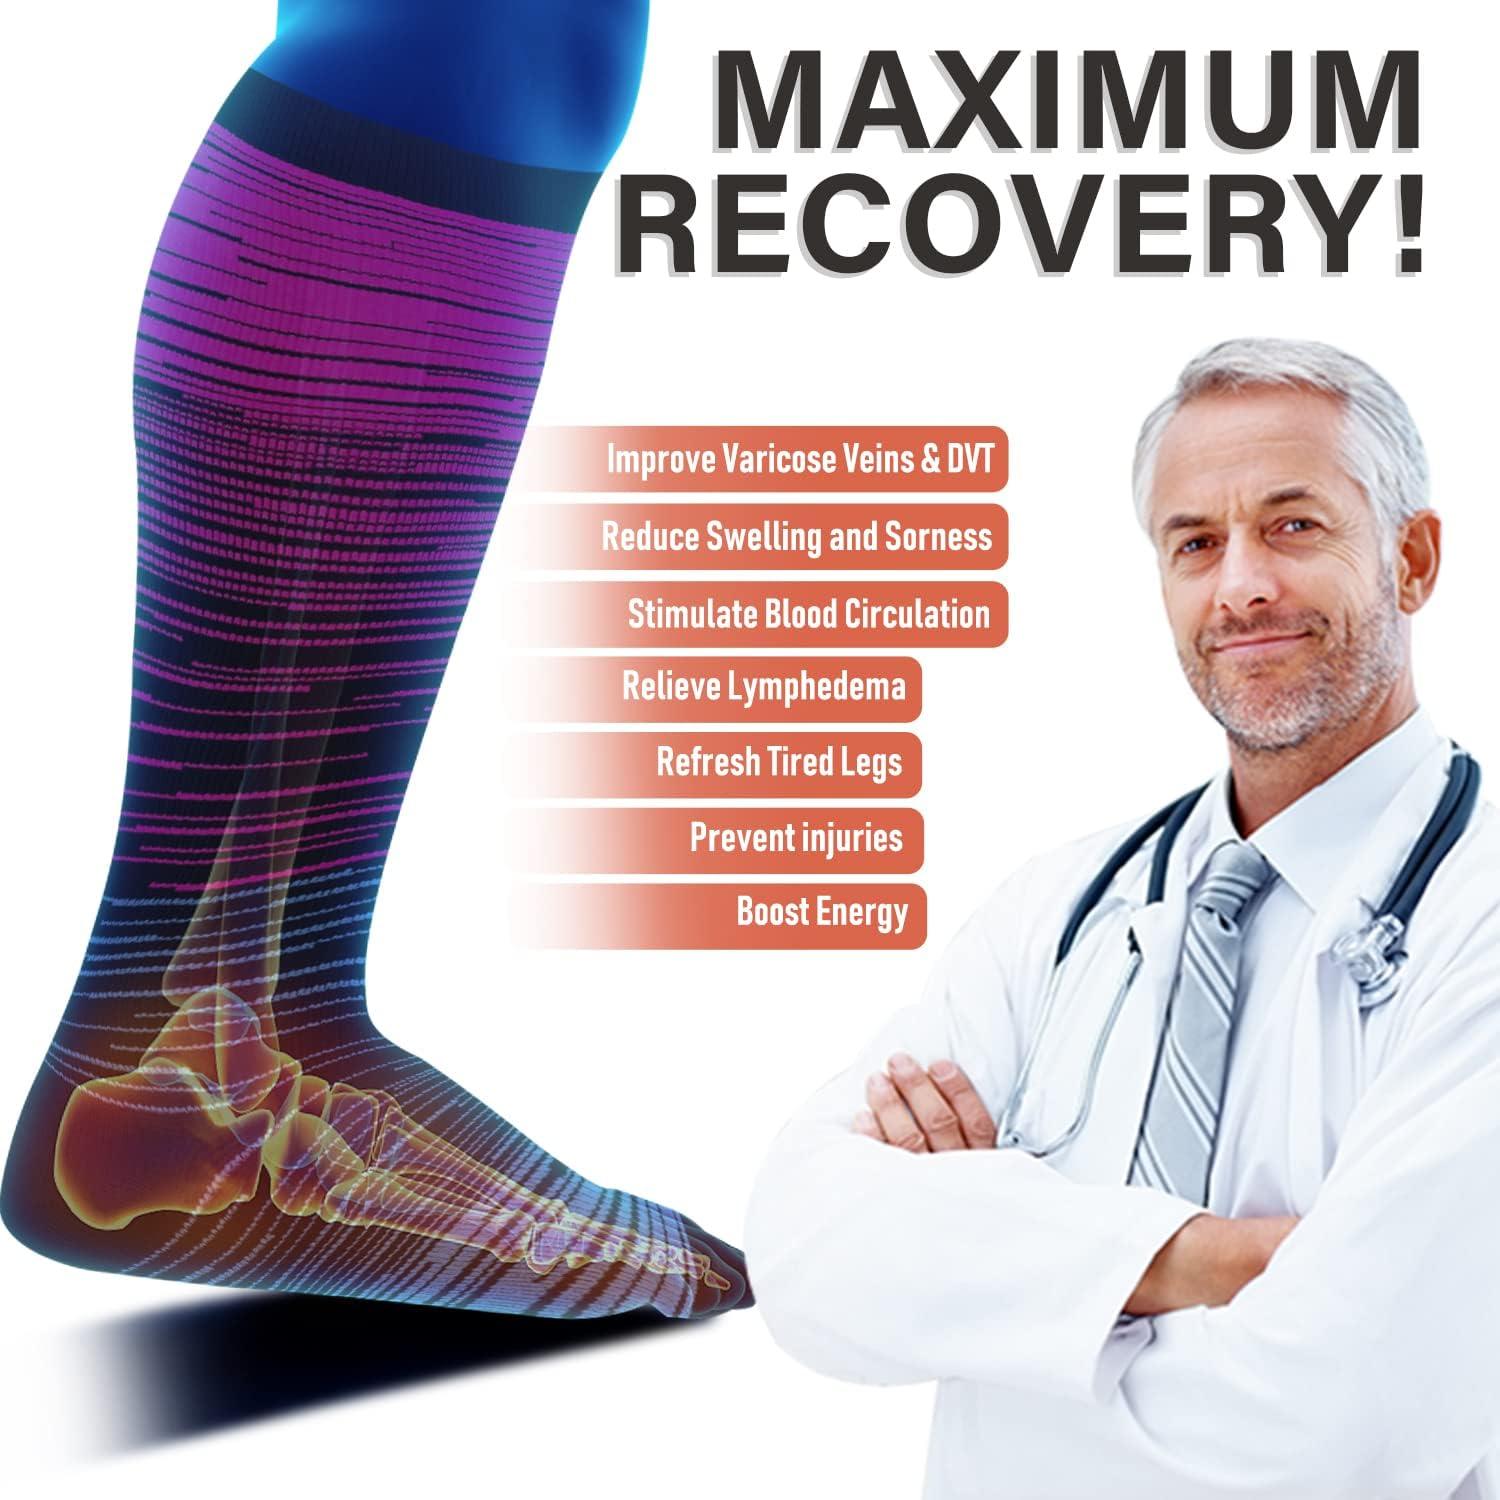 Compression Socks - Prevent and Treat Varicose Veins, Ease Feet and Ankle  Swelling, Stimulate Blood Flow Circulation. Great for Travel, Sports,  Athletes, Nurses and Maternity. No More Tired Achy Legs. : 